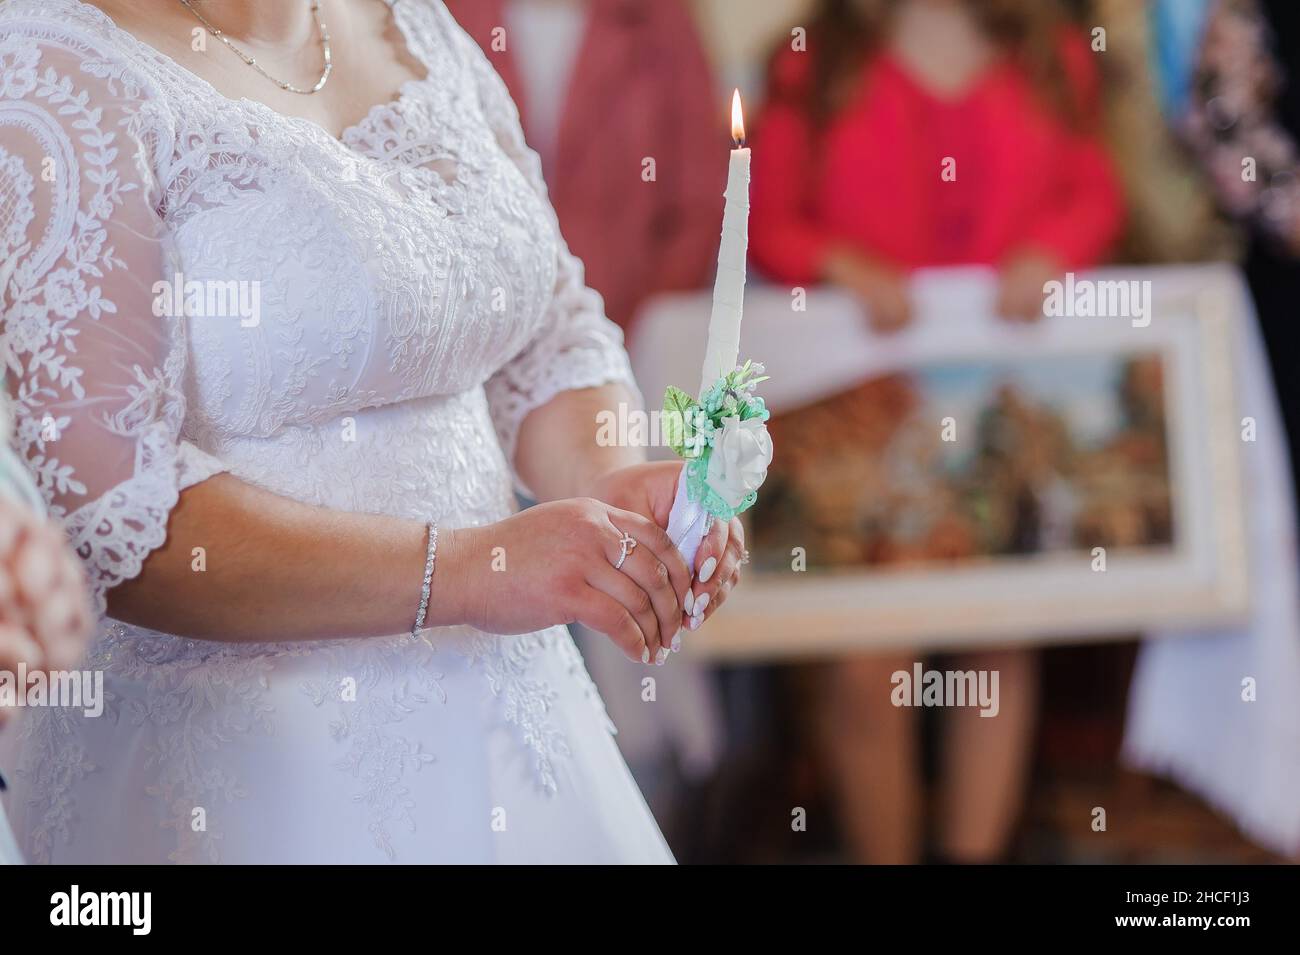 The bride and groom hold shining candles during the ceremony in the church. Hands of newlyweds with candles in the church. Church religious details Stock Photo